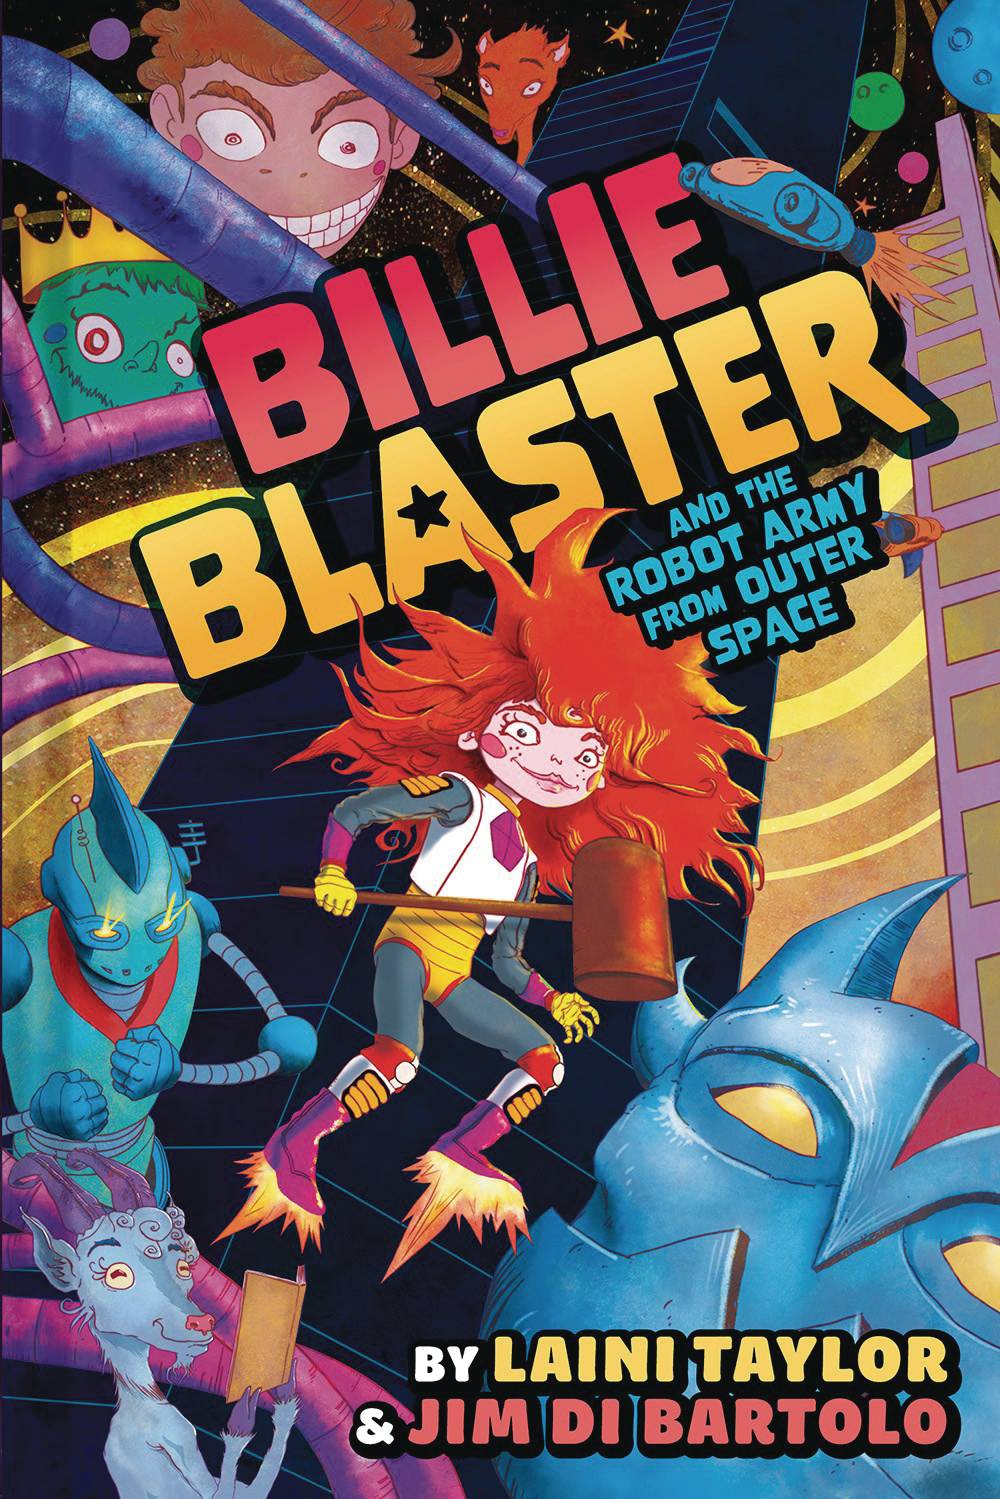 BILLIE BLASTER & ROBOT ARMY FROM OUTER SPACE HC GN